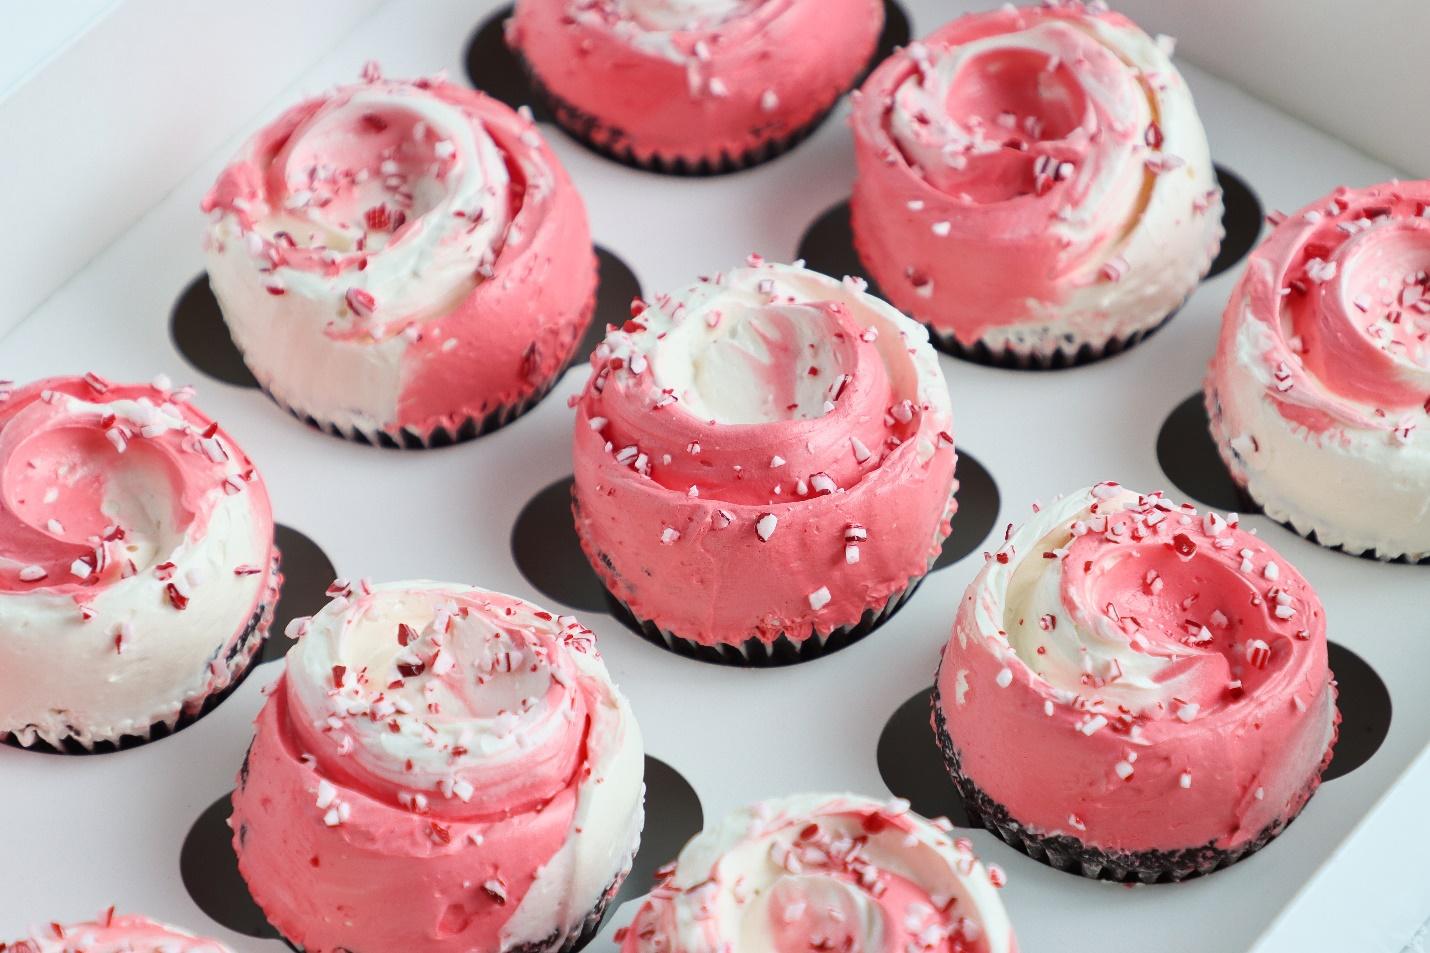 A group of cupcakes with pink frosting

Description automatically generated